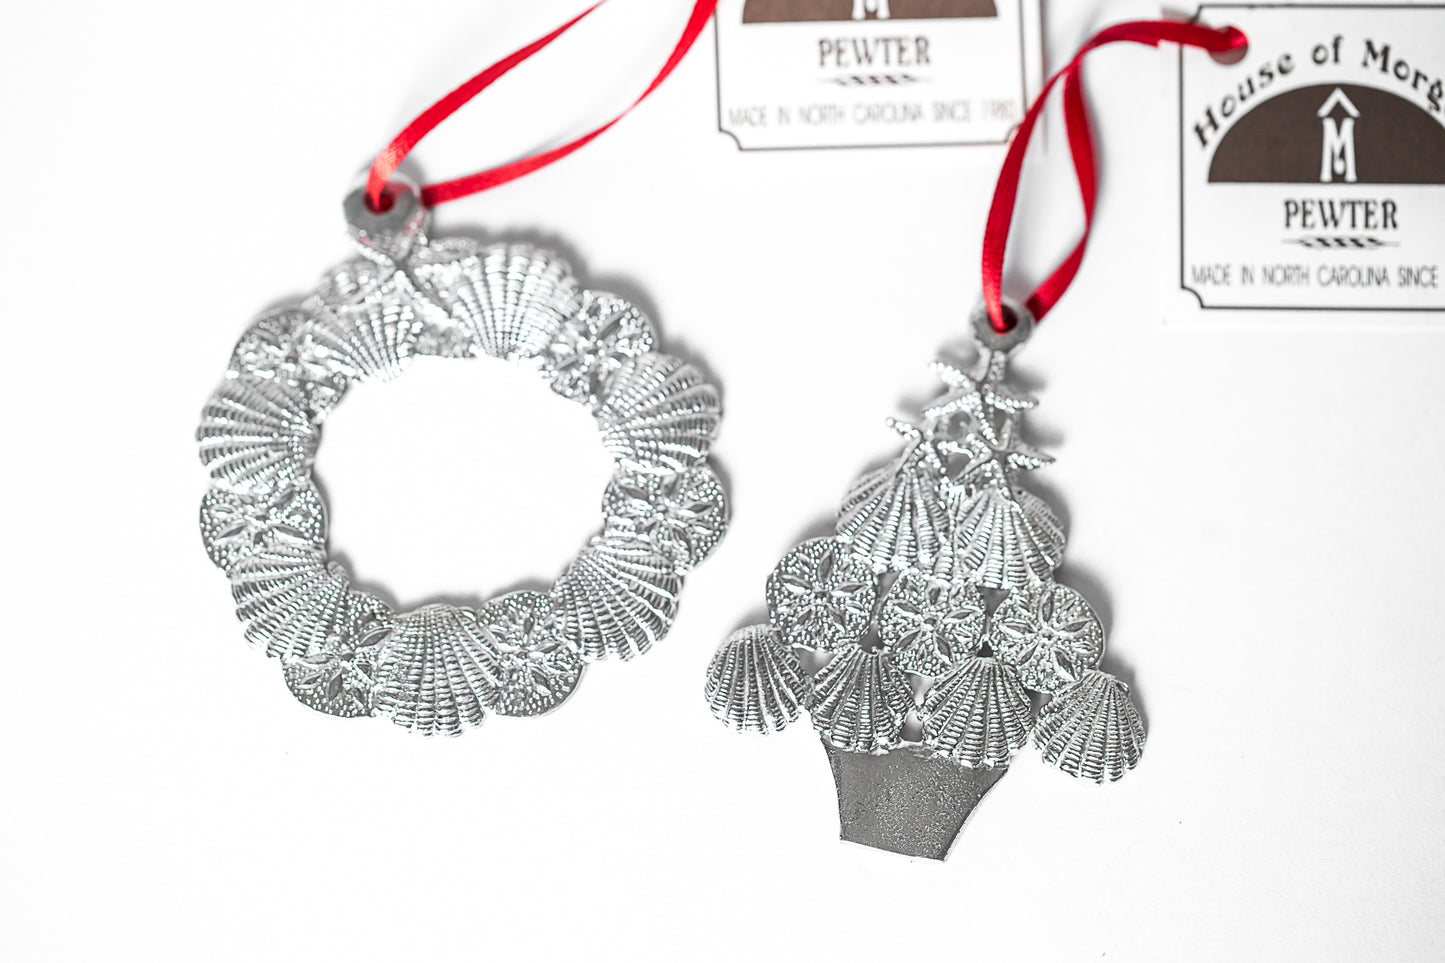 Seashell Gifts - Shell Wreath Christmas Ornament Pewter